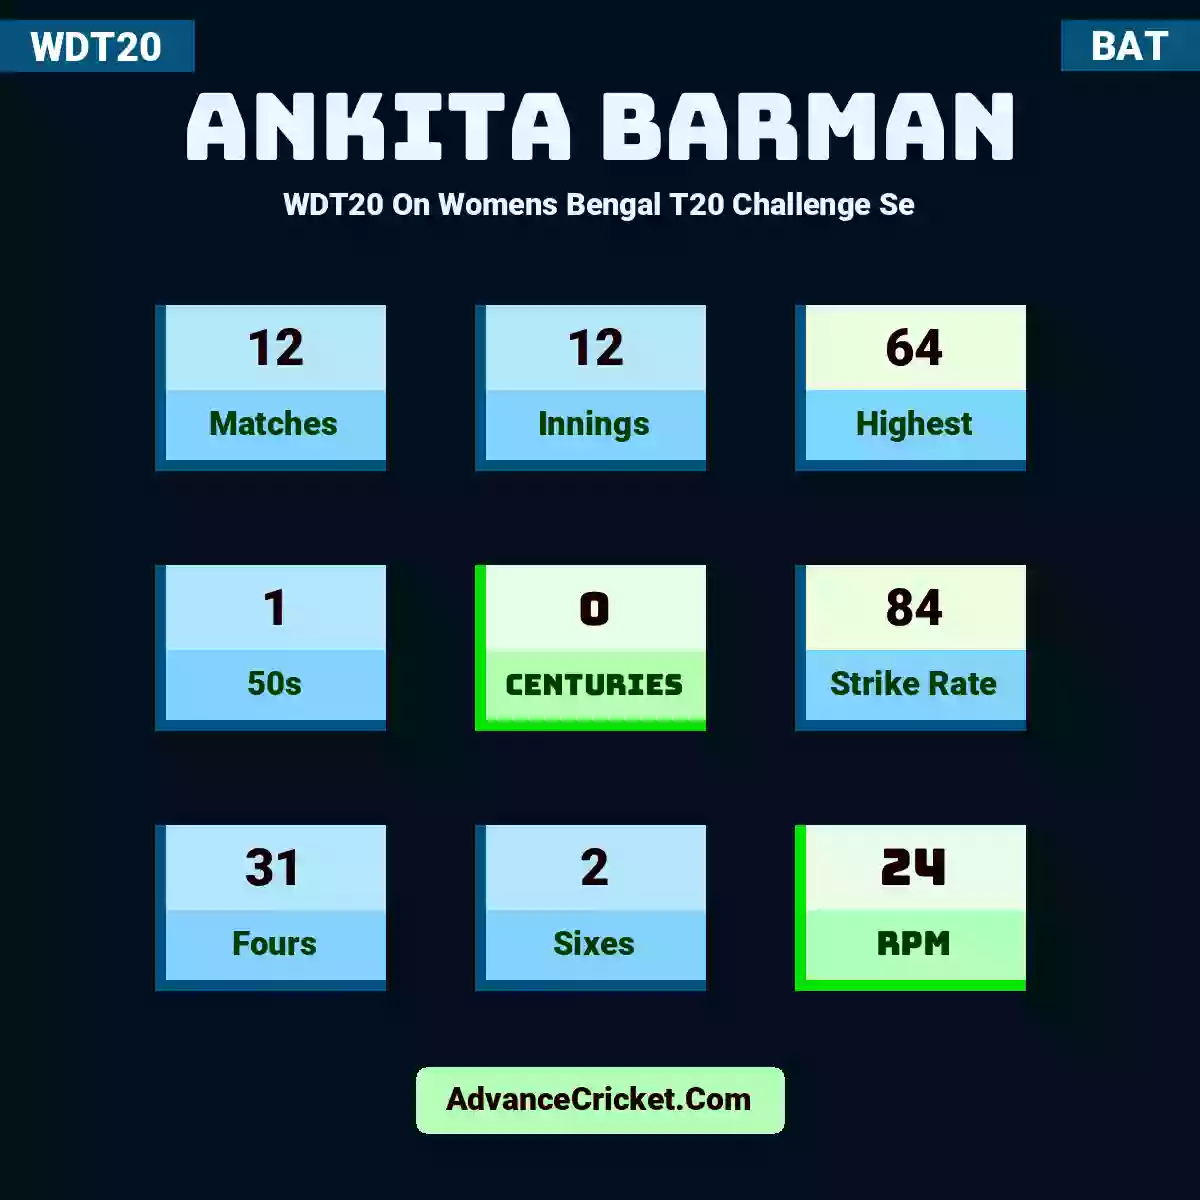 Ankita Barman WDT20  On Womens Bengal T20 Challenge Se, Ankita Barman played 12 matches, scored 64 runs as highest, 1 half-centuries, and 0 centuries, with a strike rate of 84. A.Barman hit 31 fours and 2 sixes, with an RPM of 24.